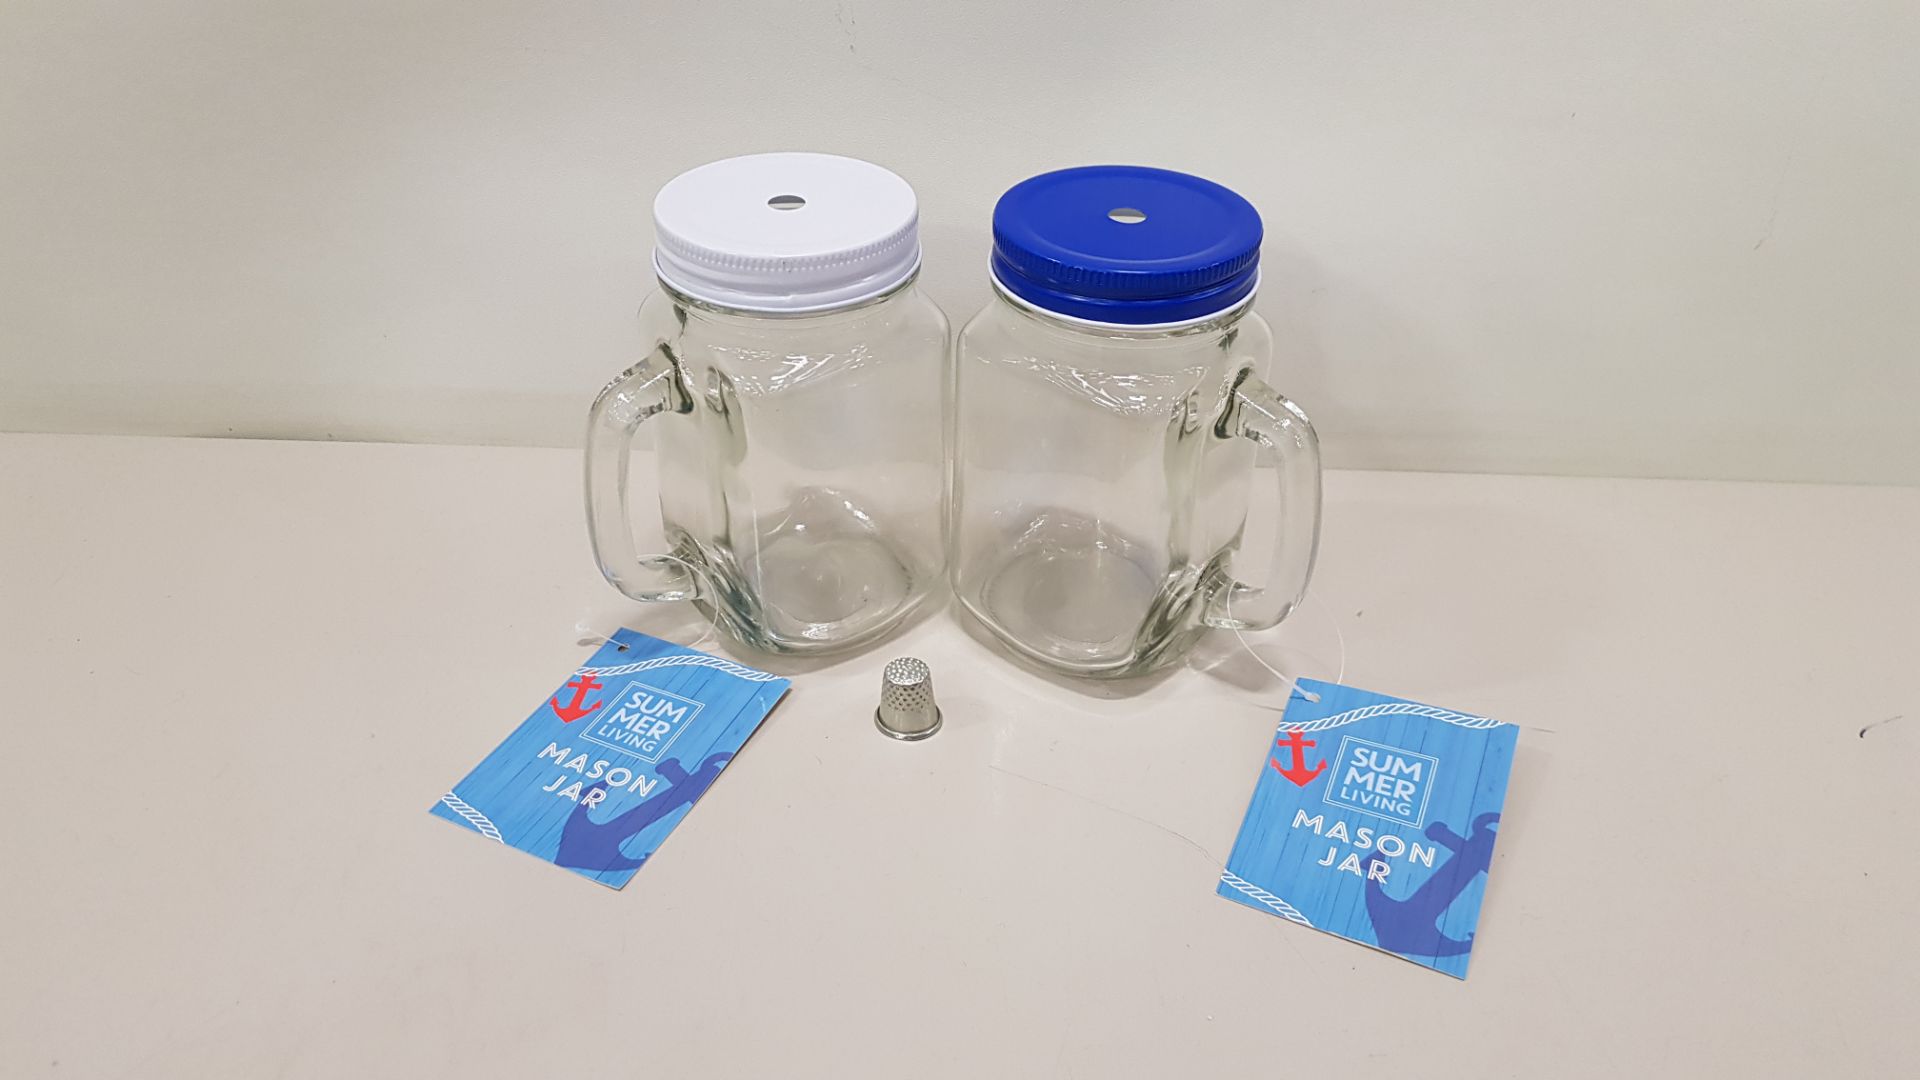 168 X BRAND NEW SUMMER LIVING MASON JARS IN BLUE AND WHITE IDEAL FOR DRINKS, WRAPPED SWEETS